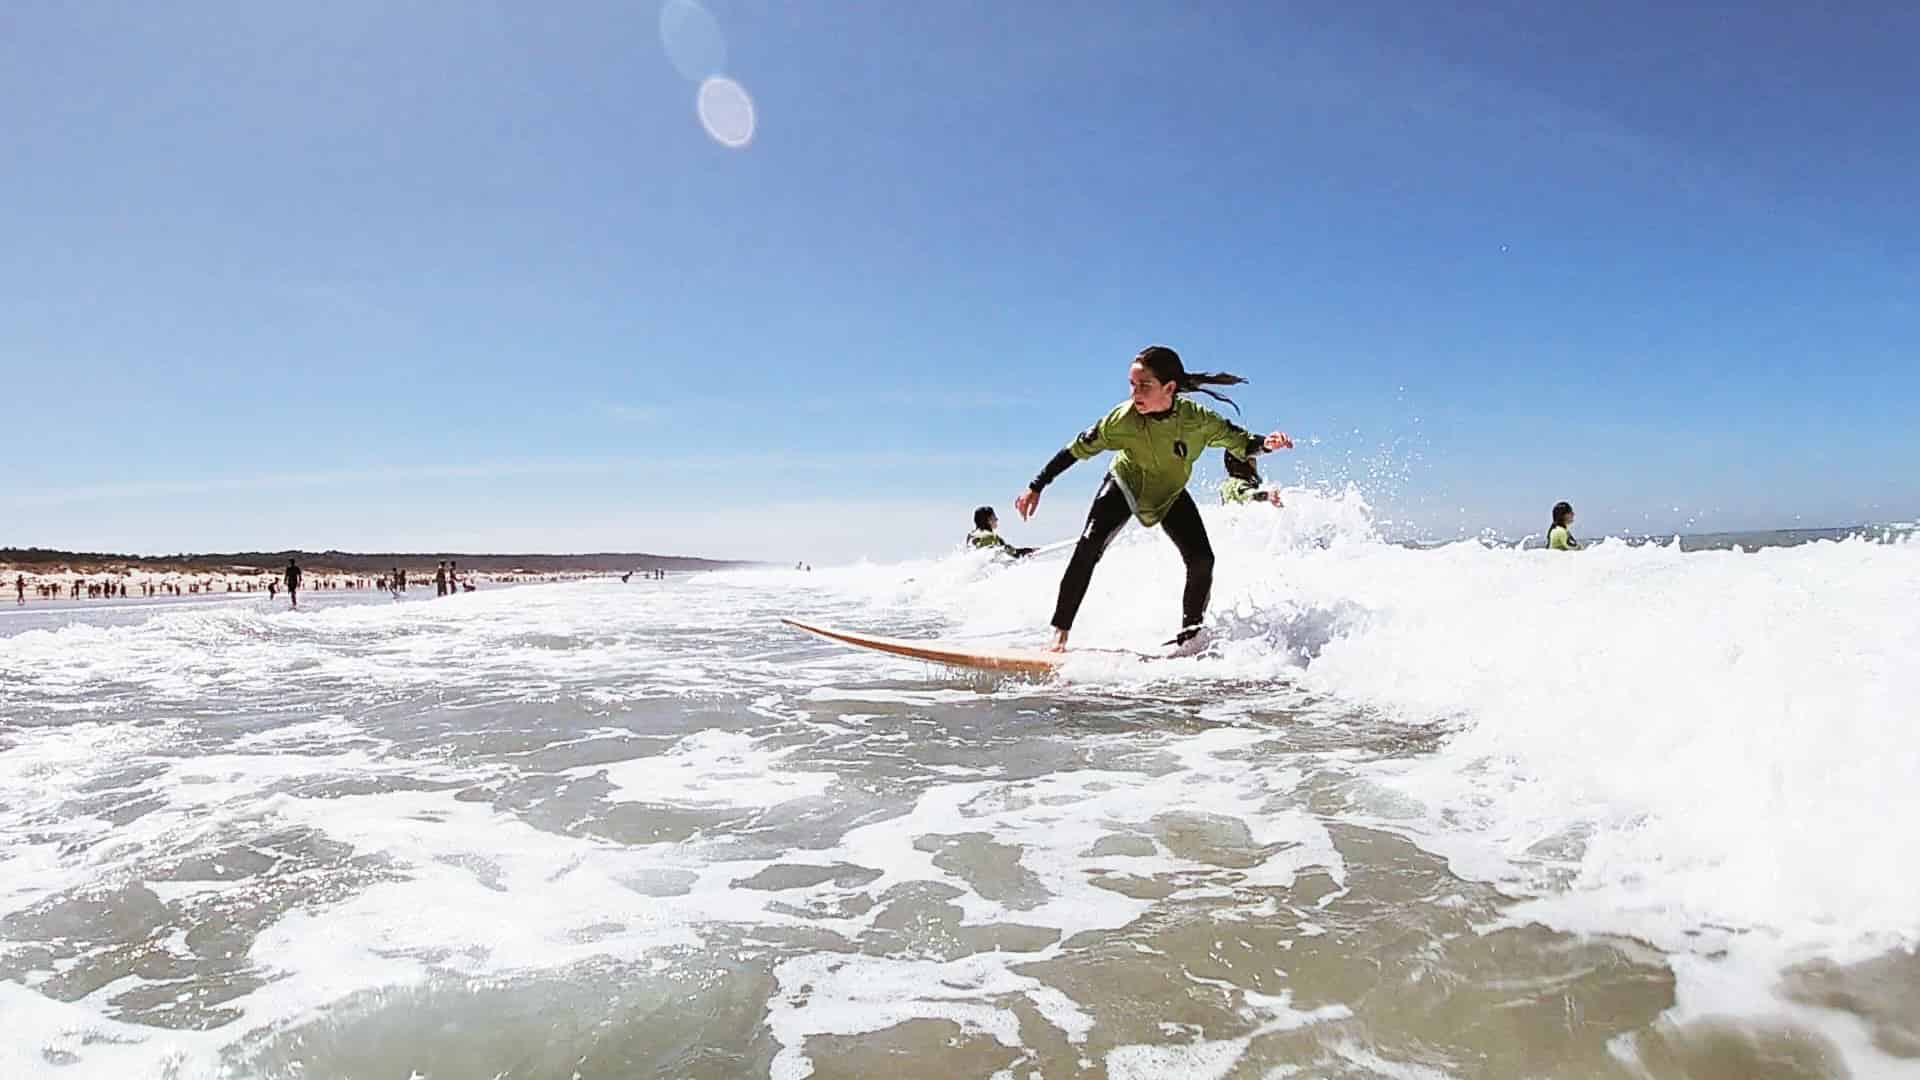 Does surfing give you a good body?